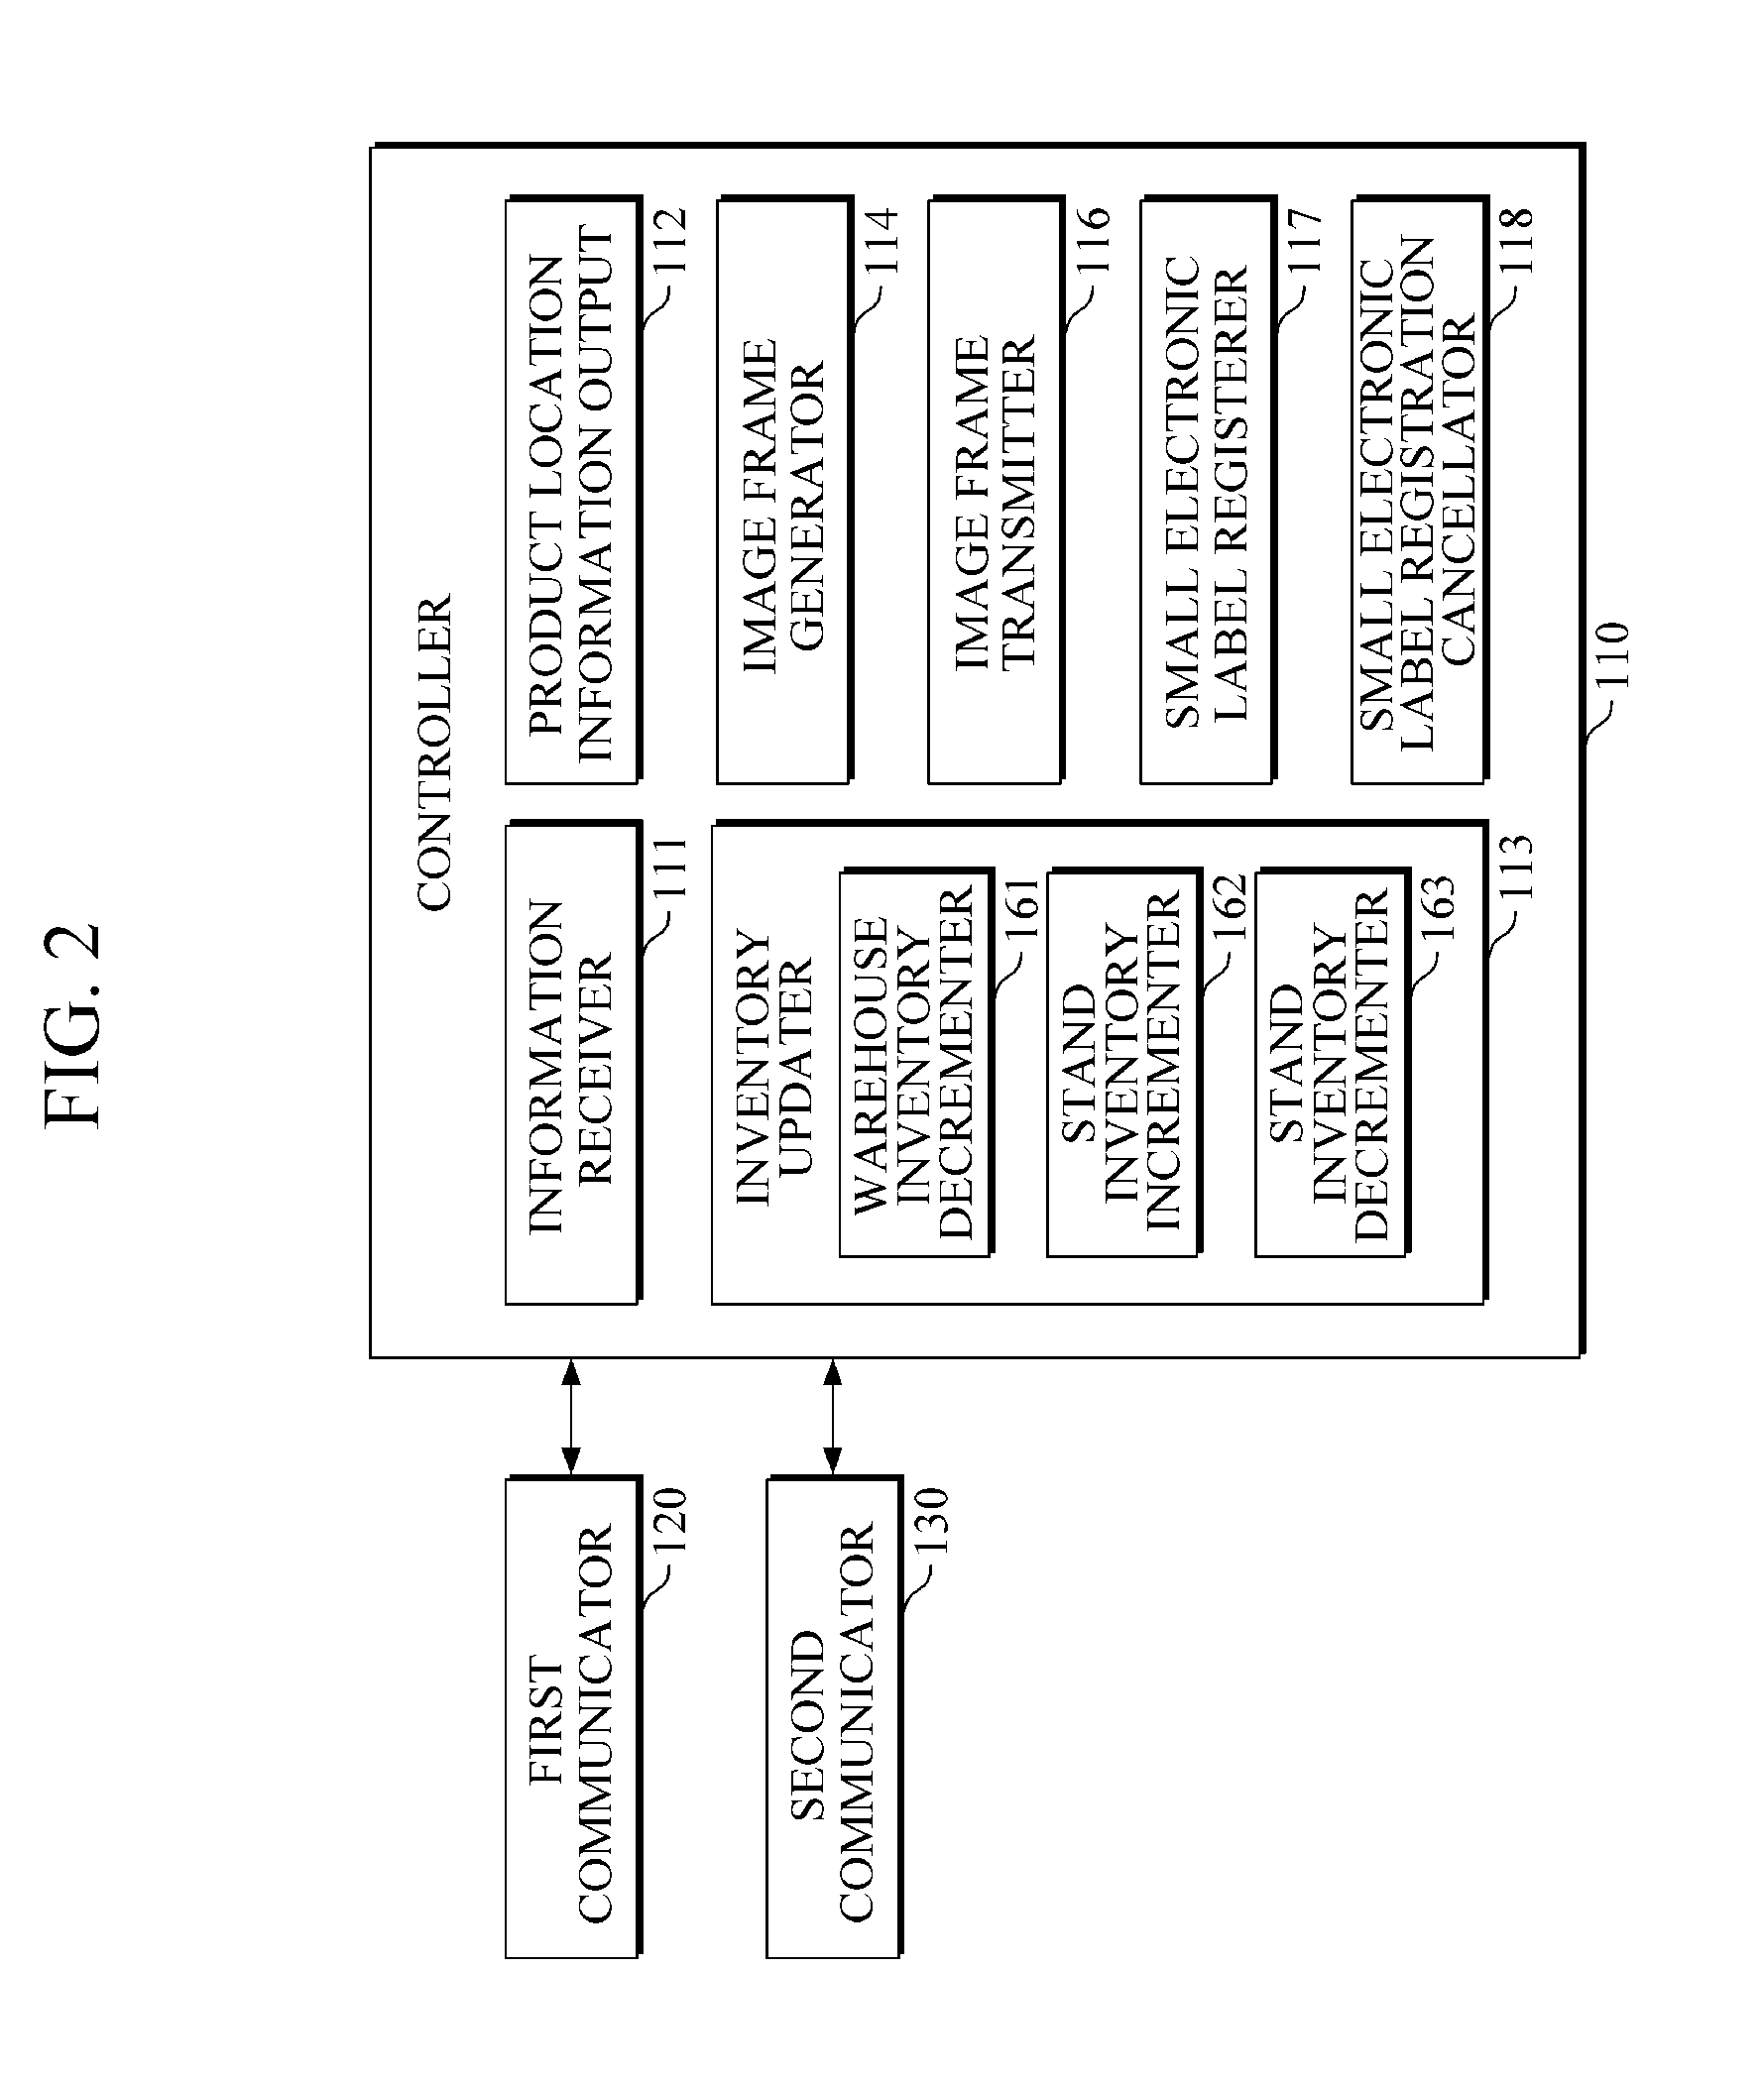 Inventory management apparatus and method